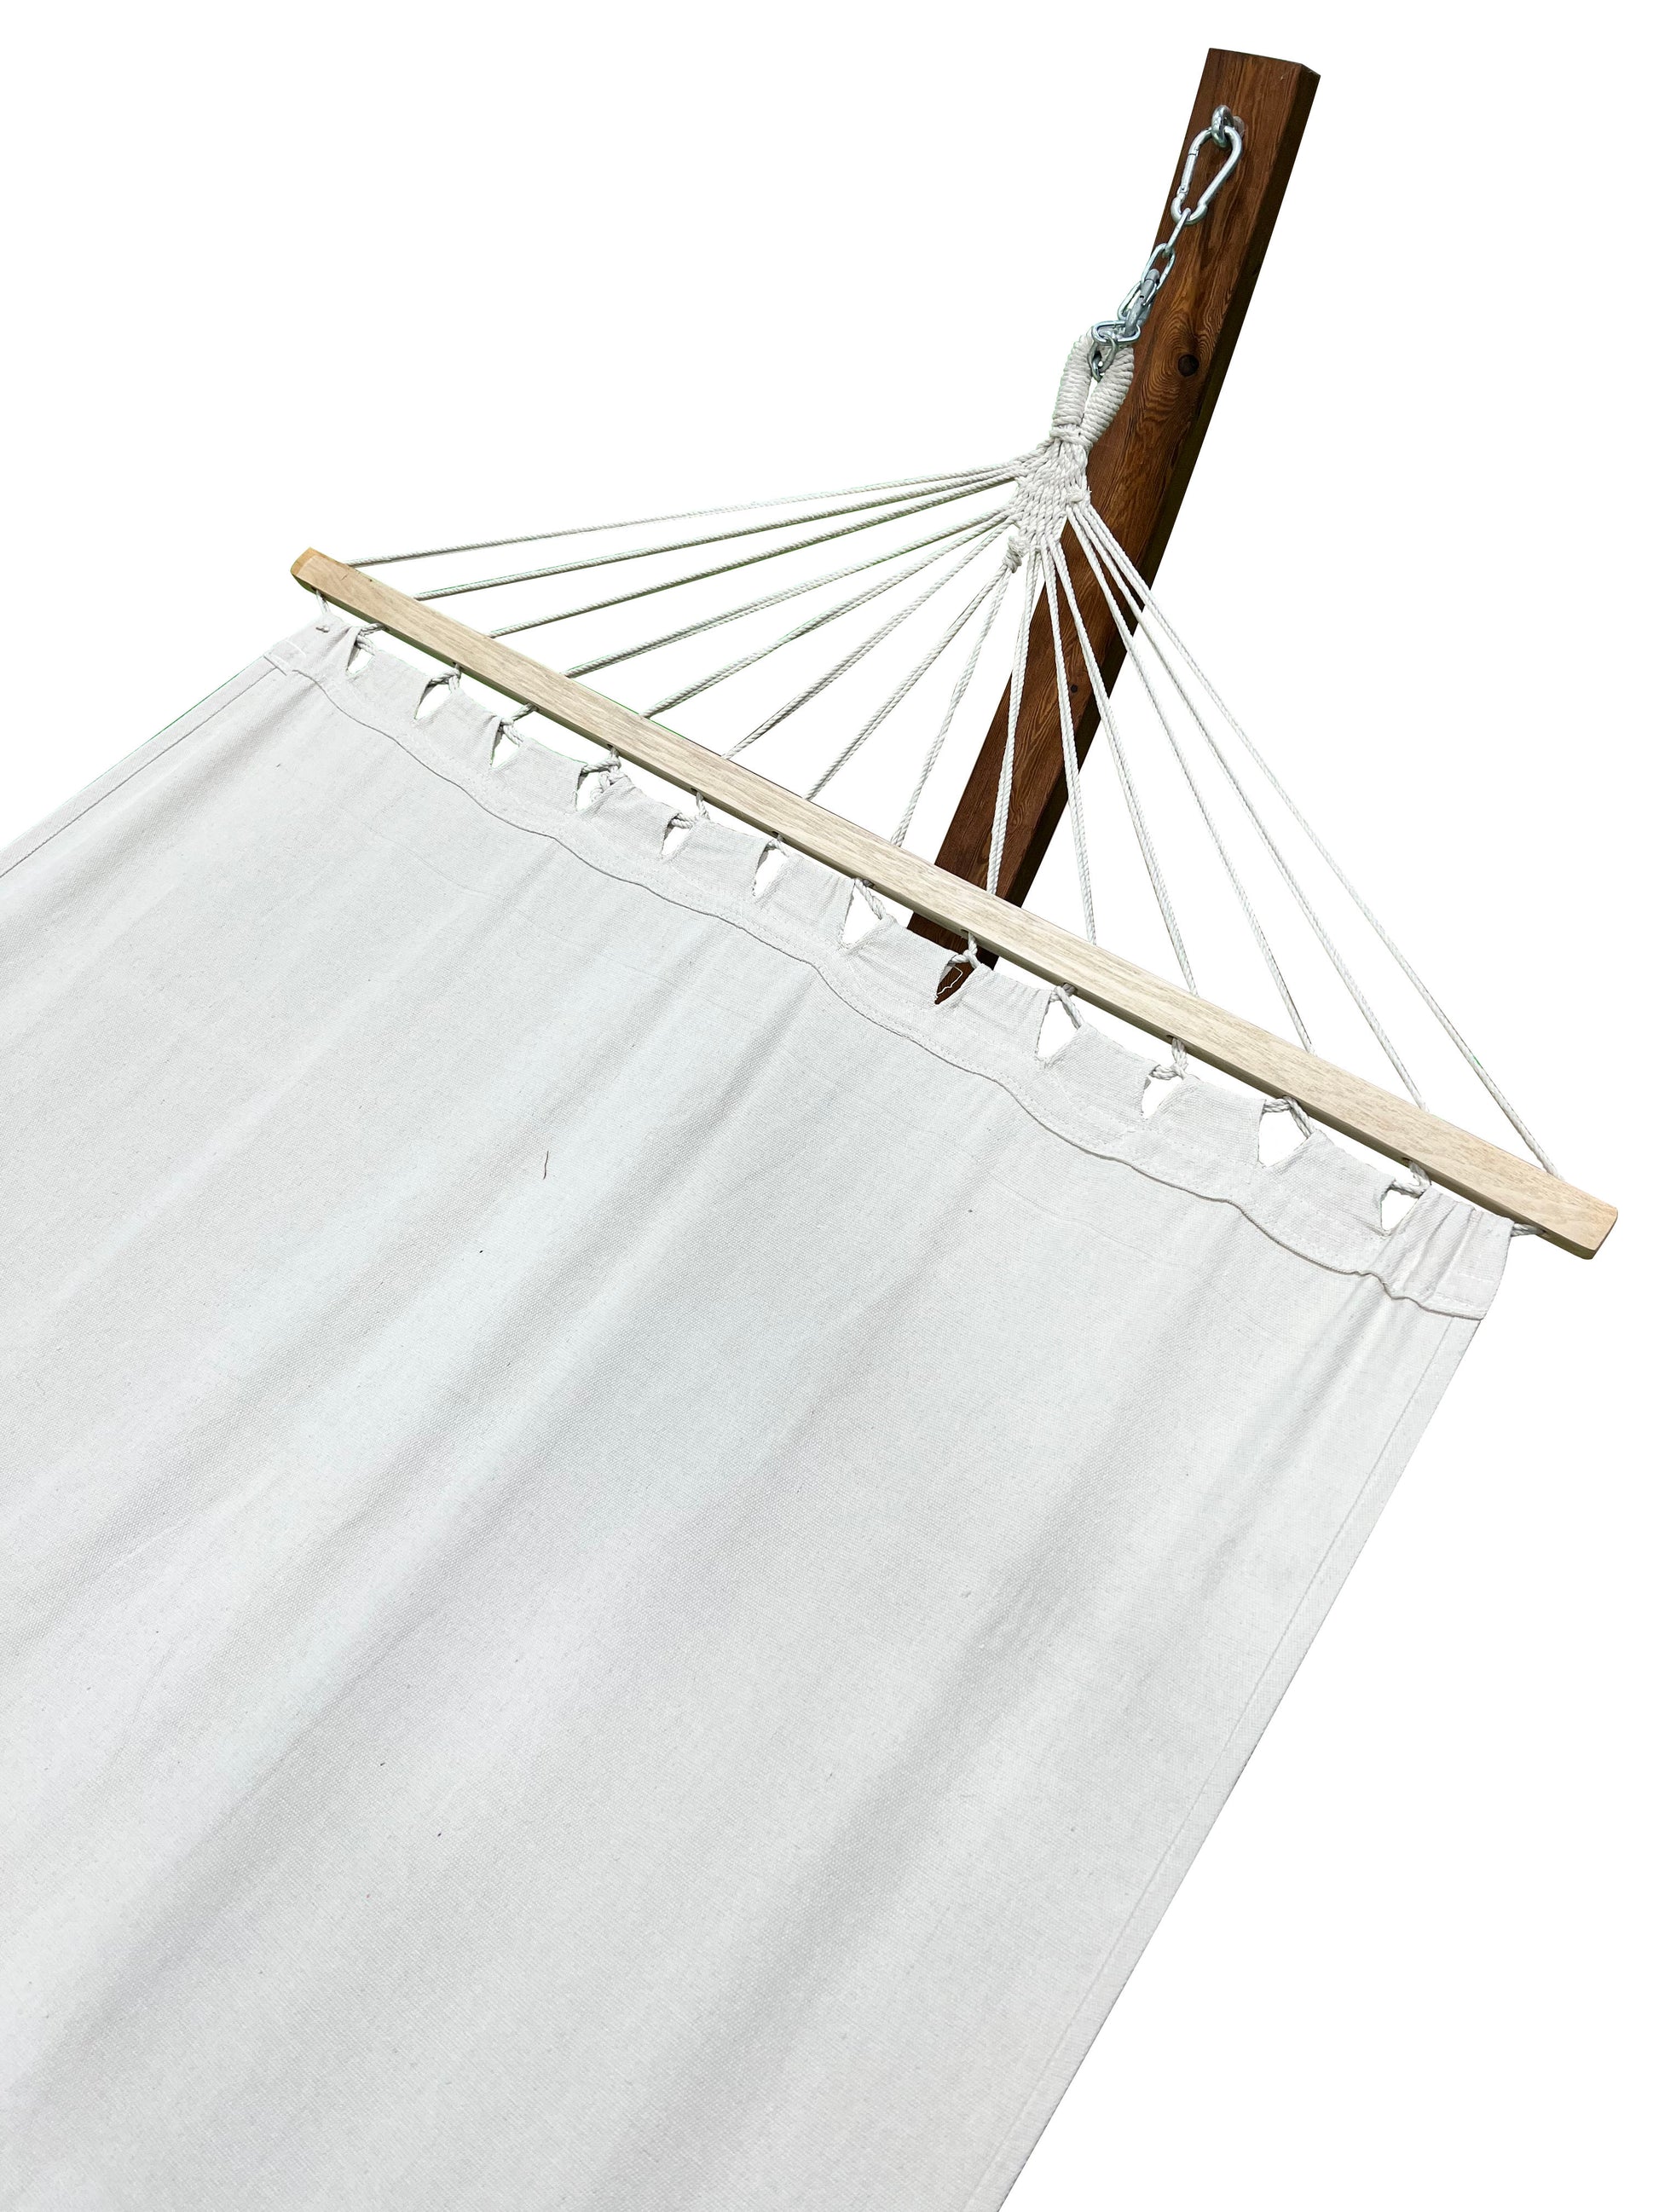 Petra Leisure® 12 Ft. Teak Stain/Water Treated Wooden Arc Hammock Stand & Bed at $249.99